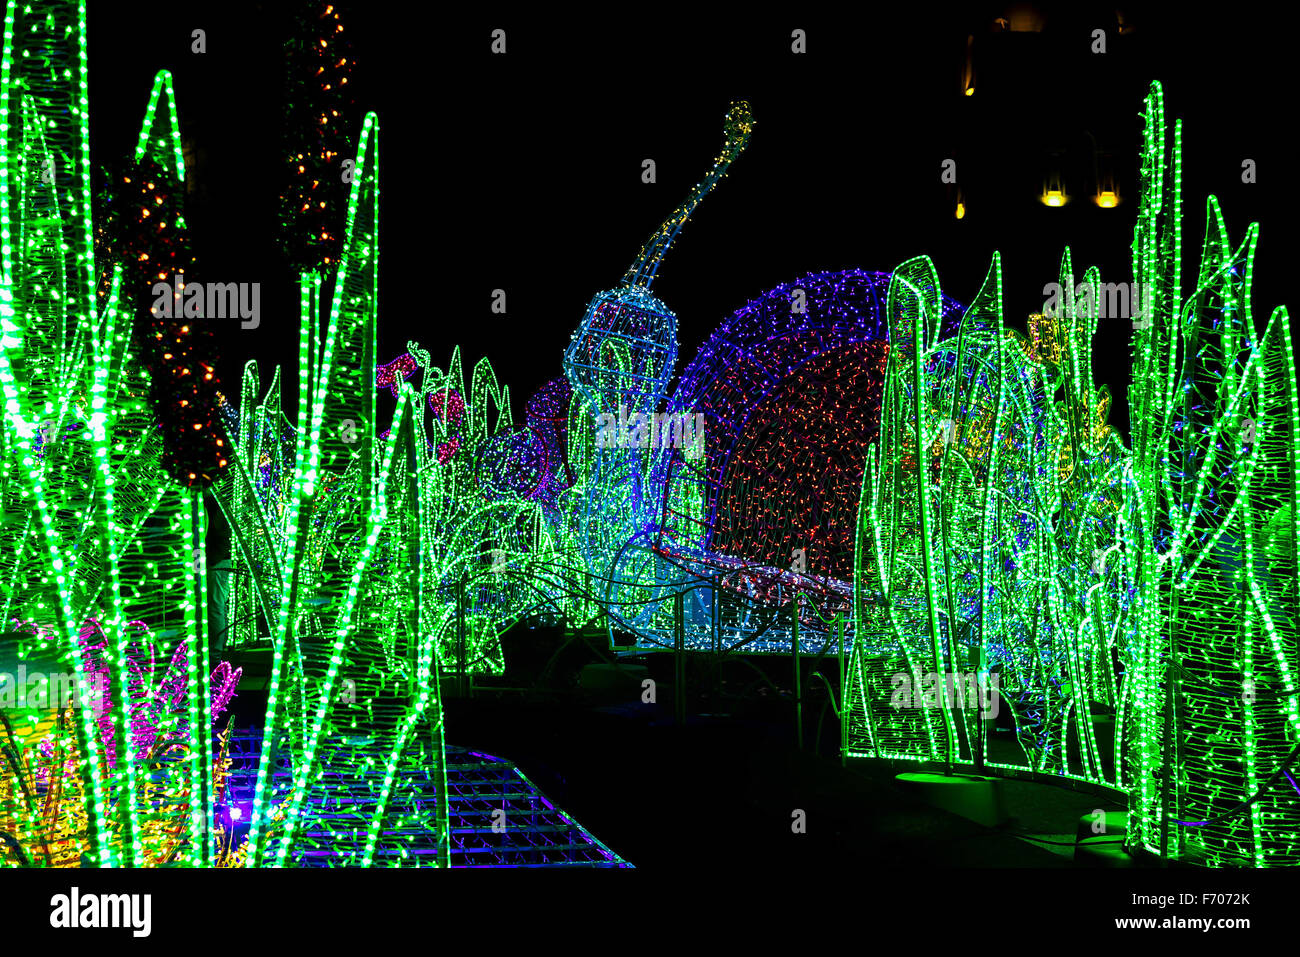 Garden of Christmas Lights with Sculptures of Snail and Grass made from Colorful Lamps on Garland Stock Photo